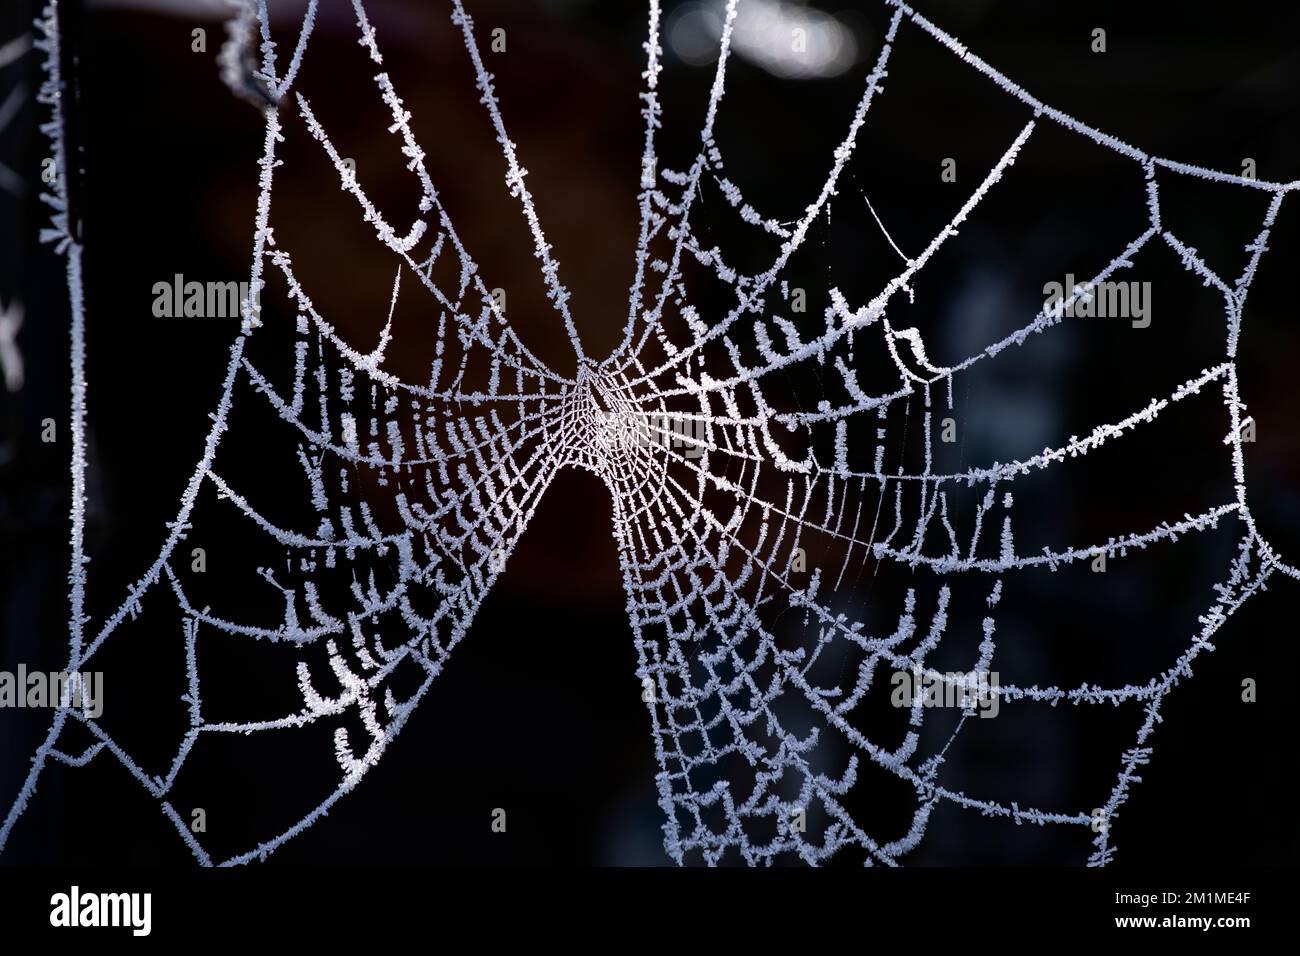 A cold Snap. Winter Frost on Spiders Webs in photographers Thaxted Essex Garden this morning 11 December 2022 Most of the UK woke to sub zero temperat Stock Photo